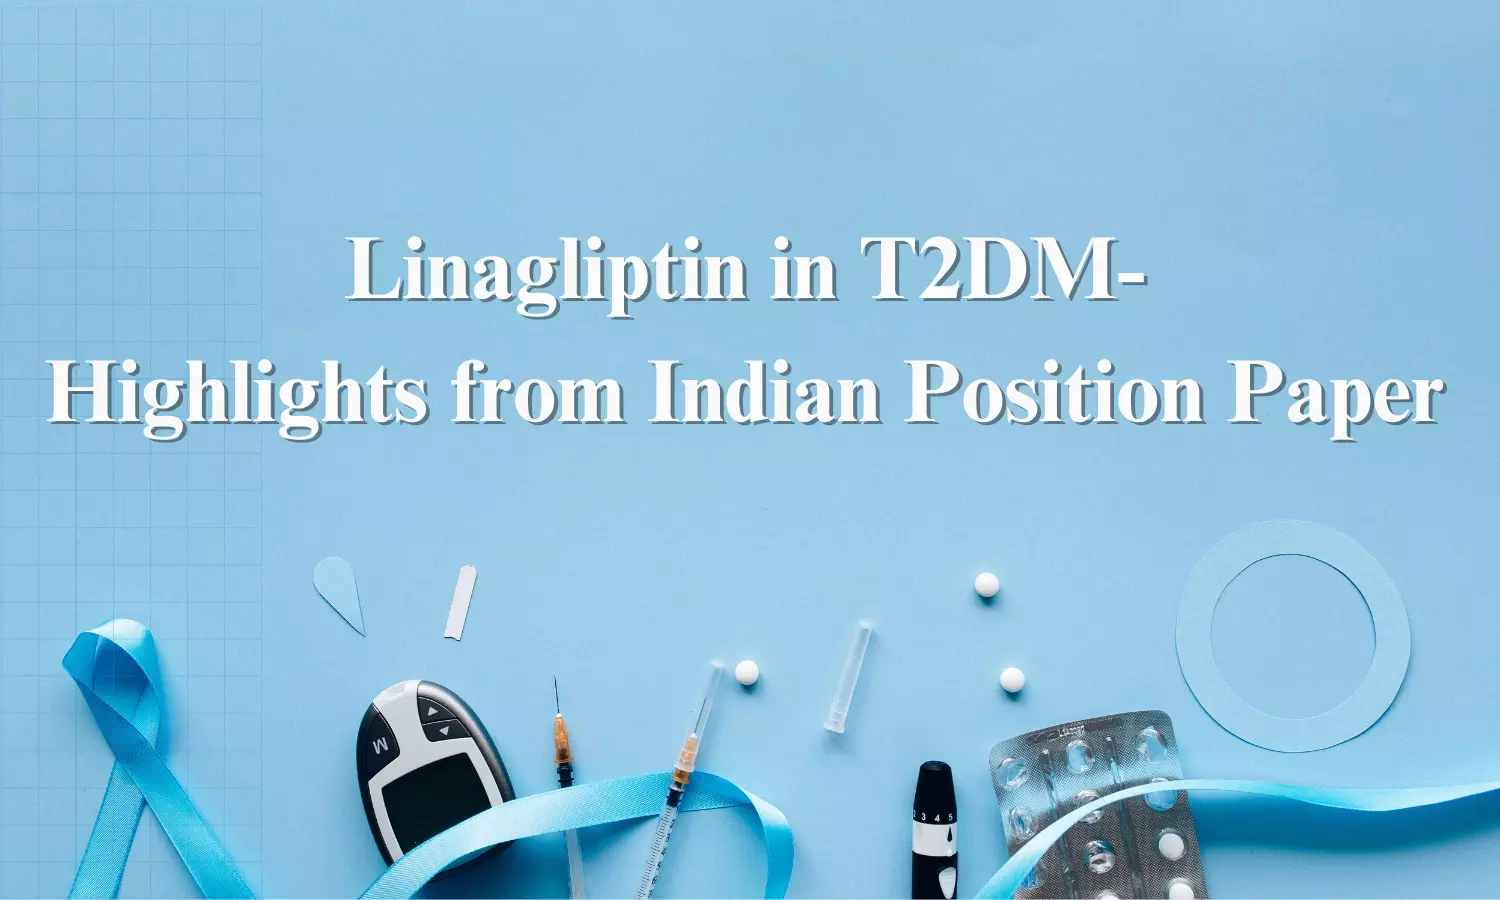 Linagliptin The Evergreen Gliptin: Indian Position Paper Highlights Wide Clinical Applicabilities of Linagliptin in T2DM